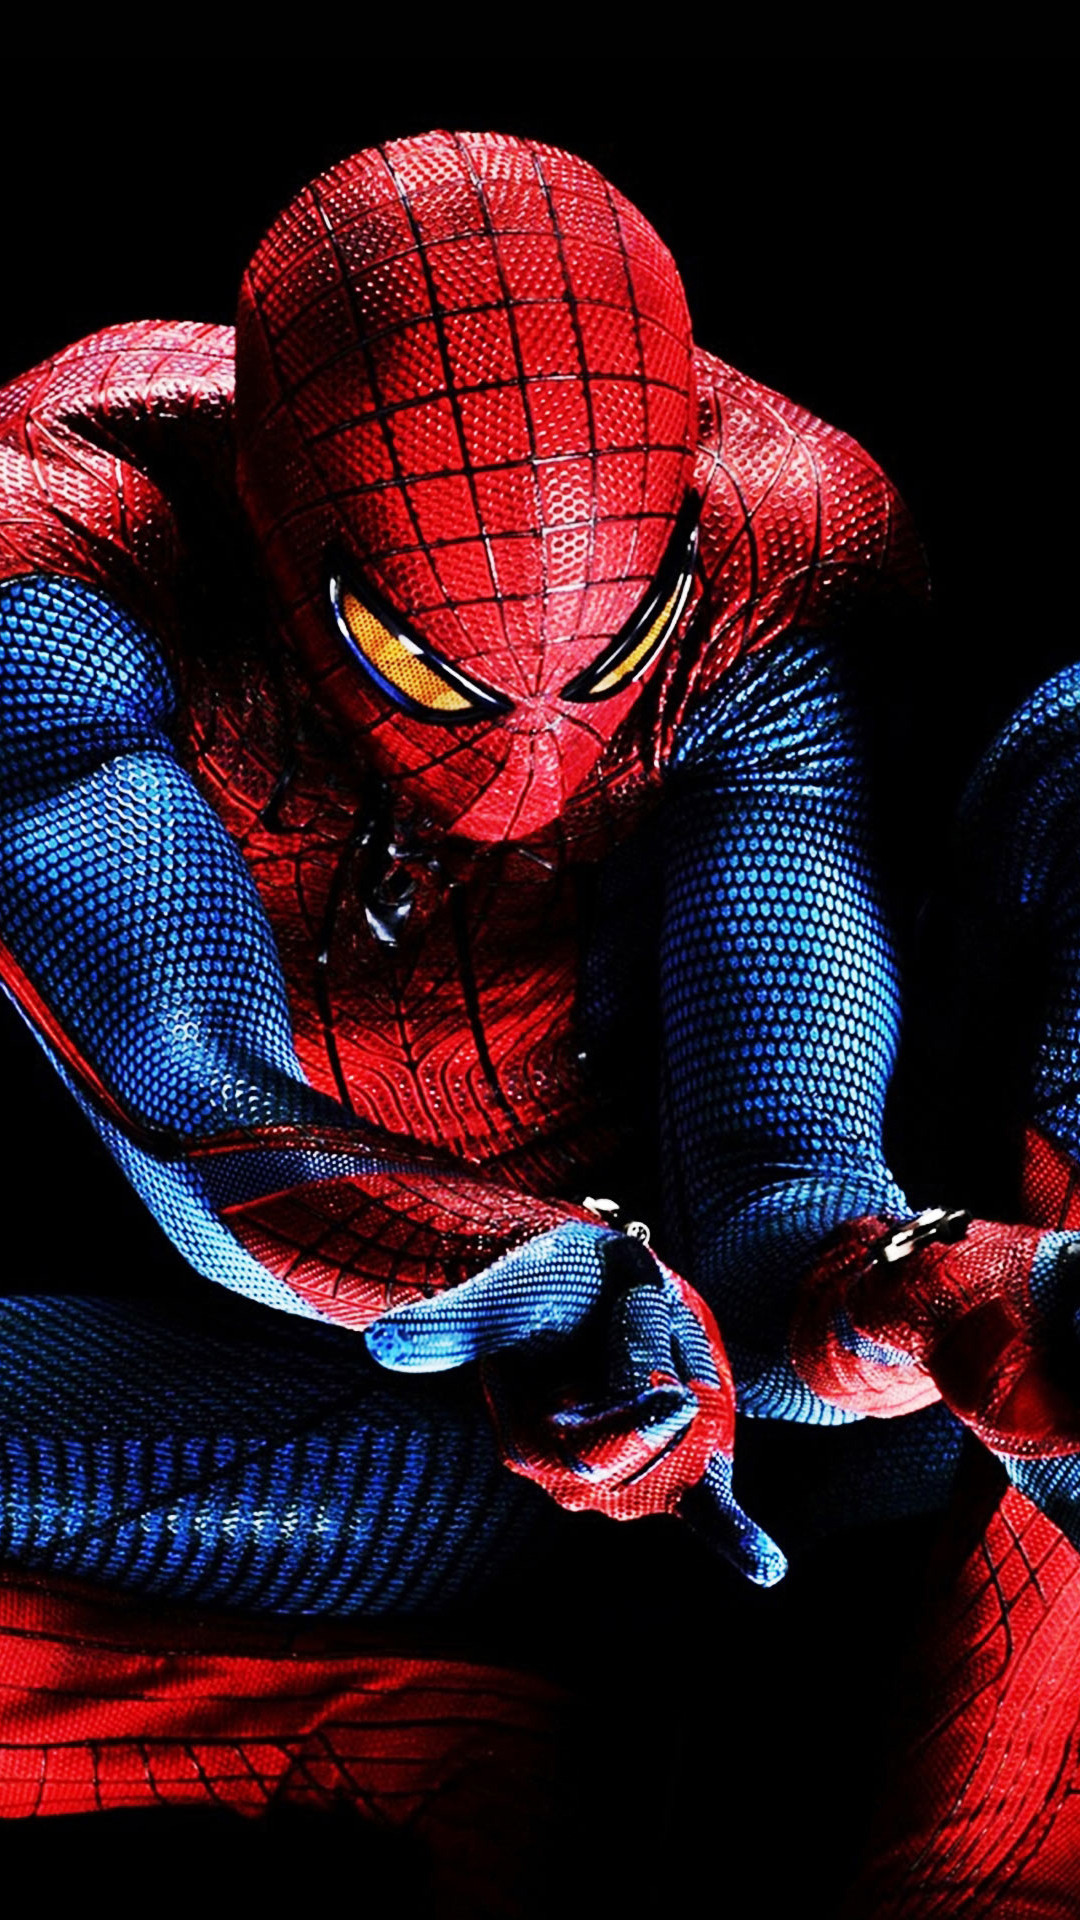 Free Download Spiderman Image For Iphone - 3d Wallpaper For Iphone 7 , HD Wallpaper & Backgrounds